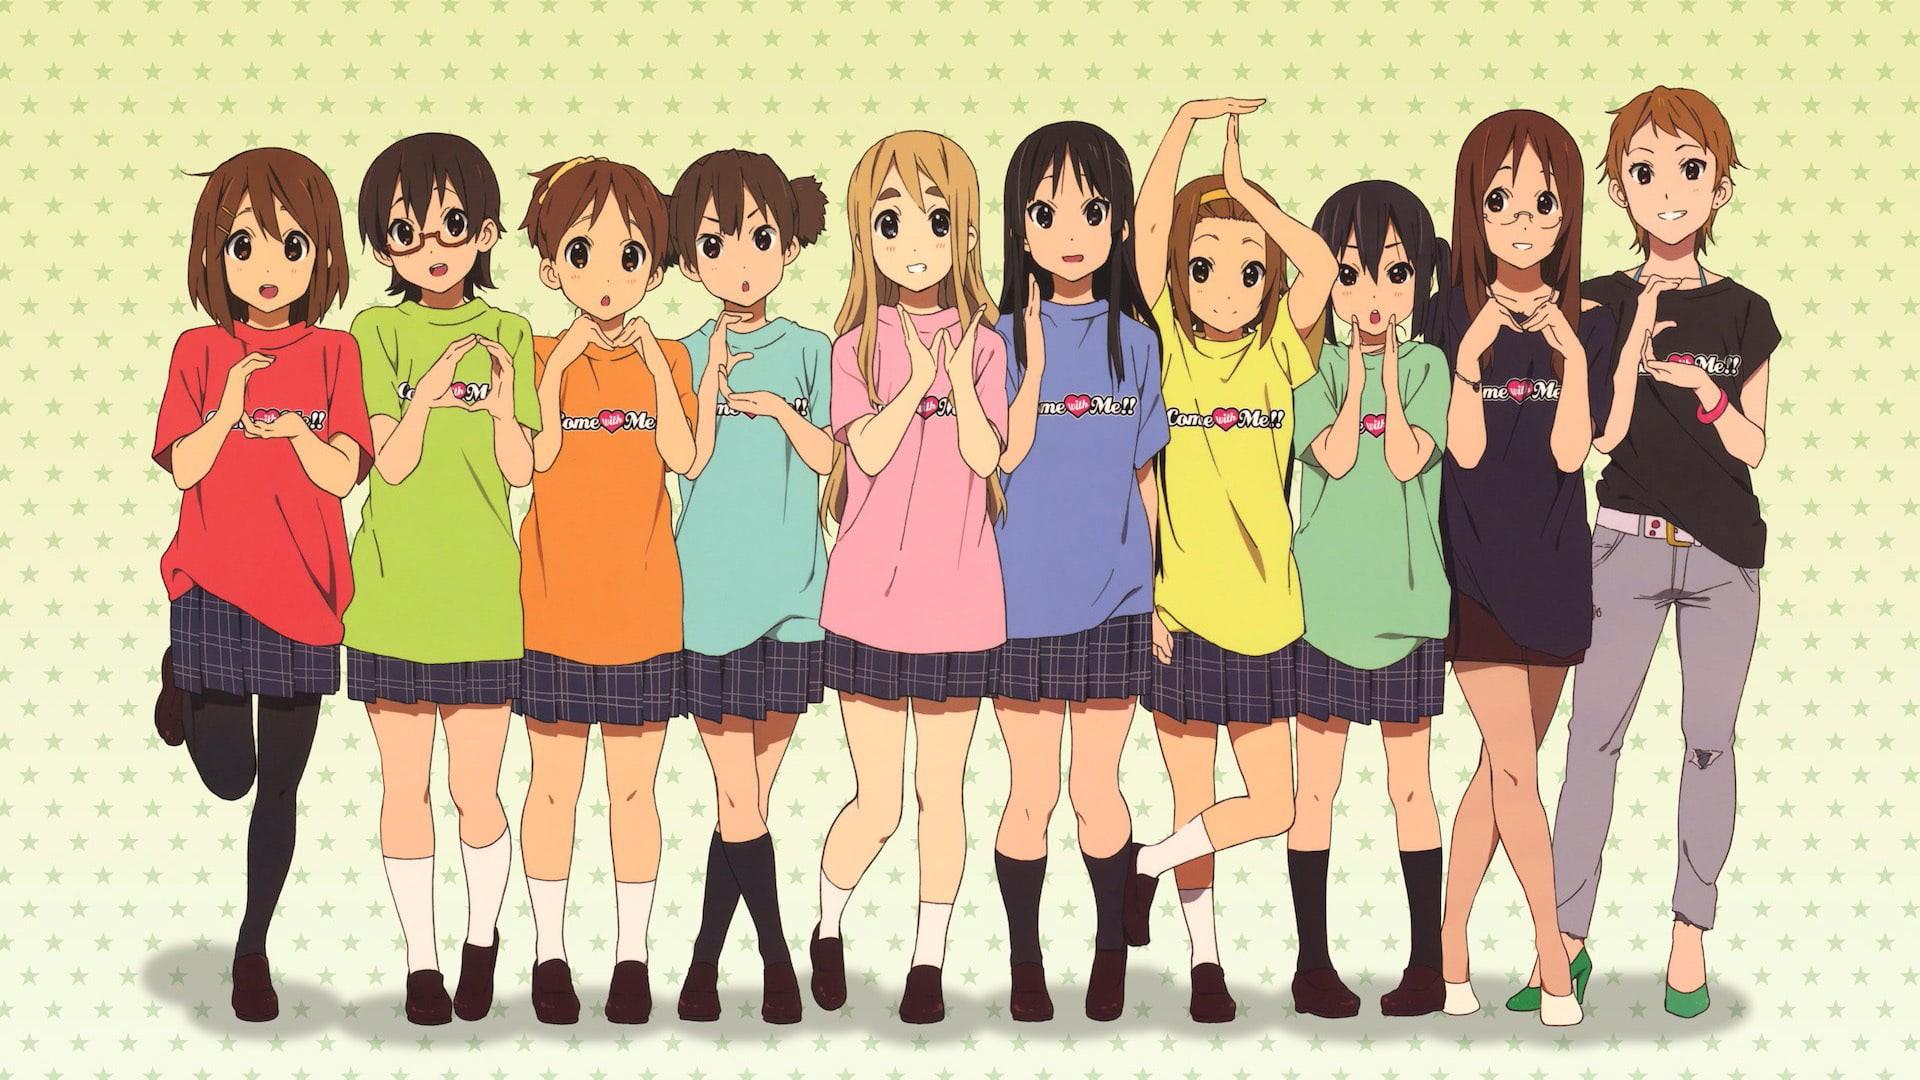 K-ON!! Live Event ~Come With Me!!~